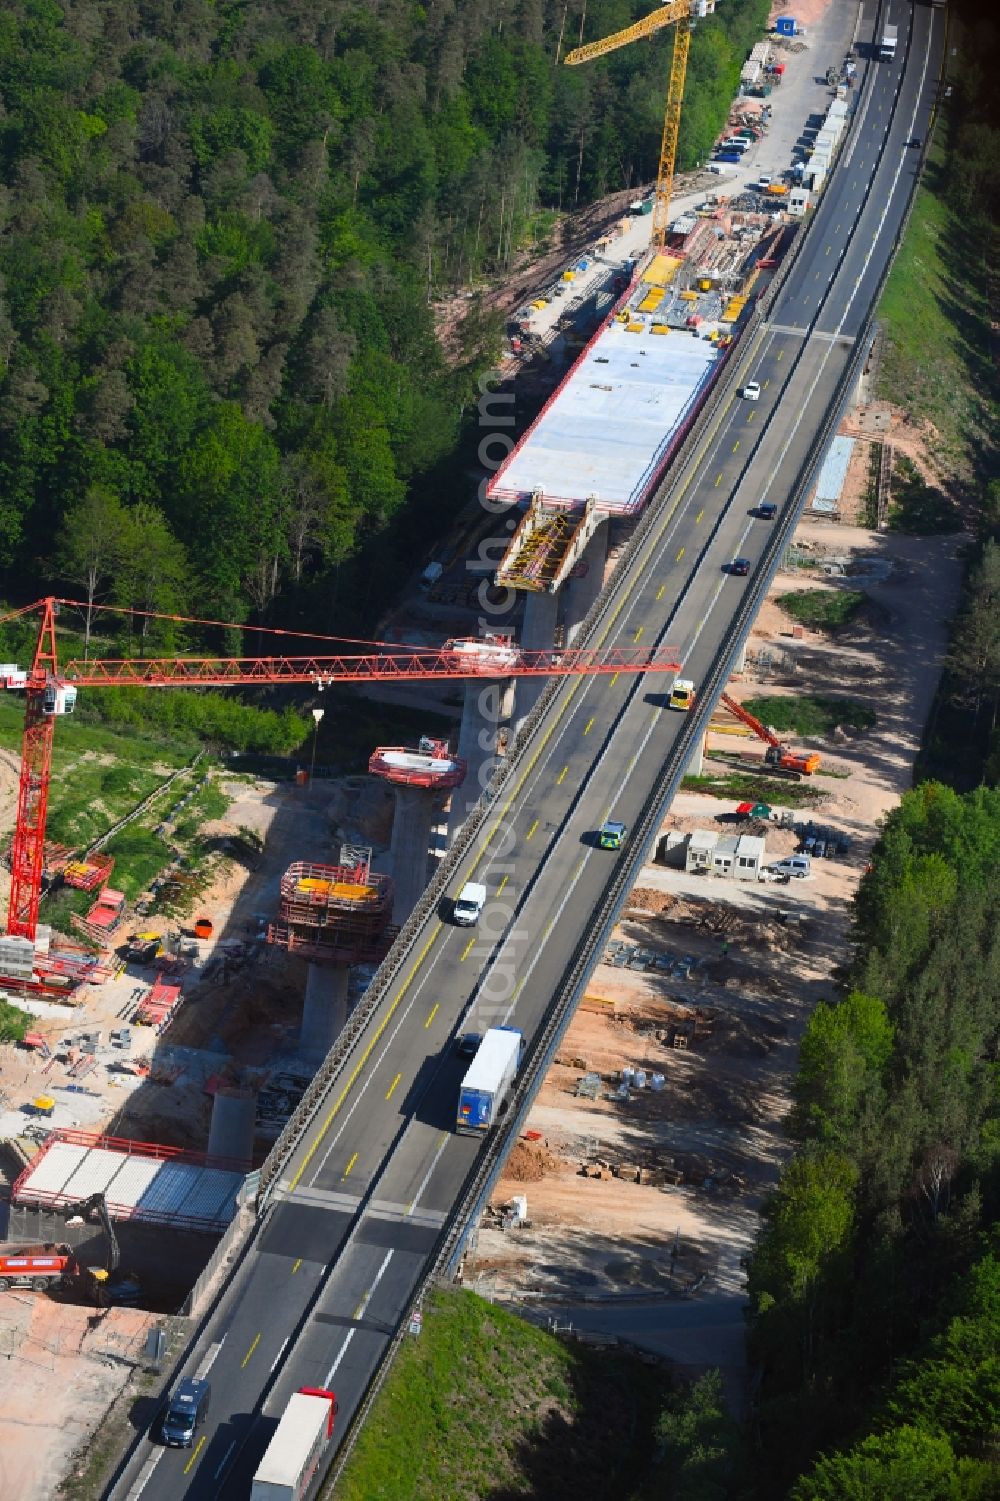 Aerial image Burghaun - Construction site for the rehabilitation and repair of the motorway bridge construction Talbruecke Langenschwarz of BAB E45 - A7 in the district Grossenmoor in Burghaun in the state Hesse, Germany